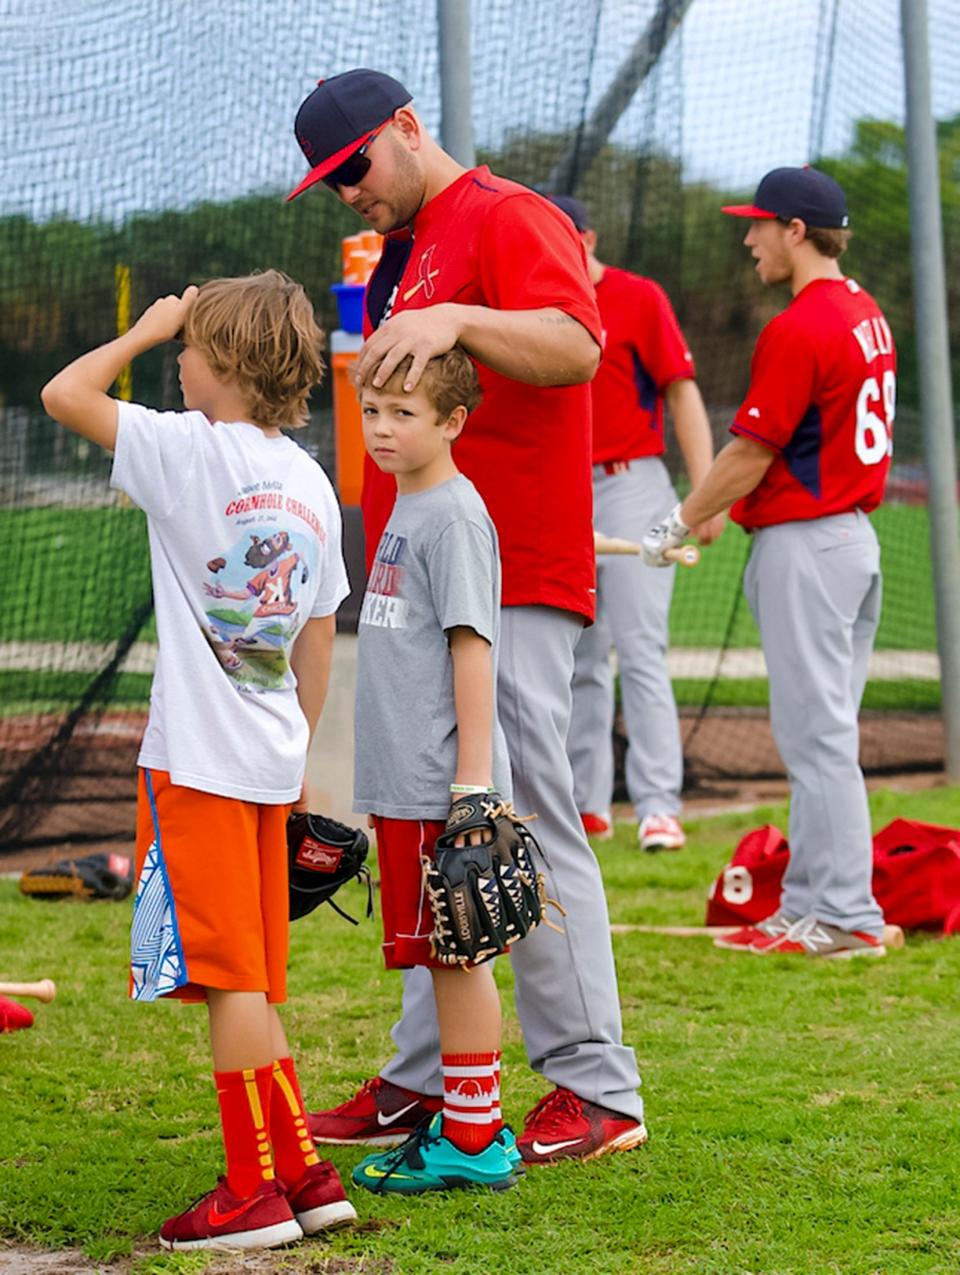 Matt Holliday, right, is pictured with sons Jackson, left, and Ethan at spring training with the St. Louis Cardinals.